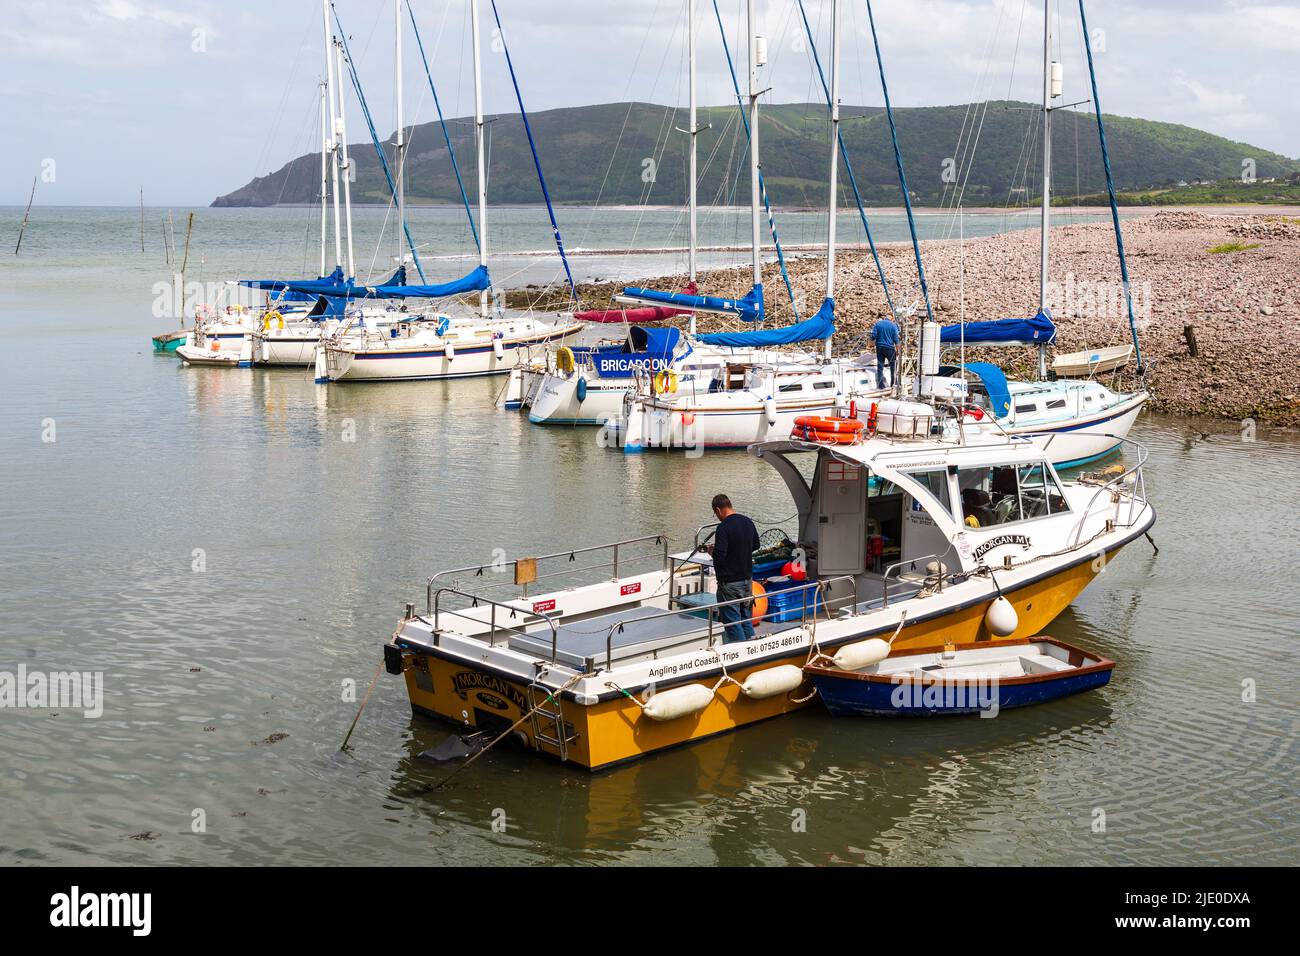 Porlock Weir,  a small port in the Exmoor National Park, Somerset, England. The harbour, with sailing boats moored up, including aan angling boat. Stock Photo